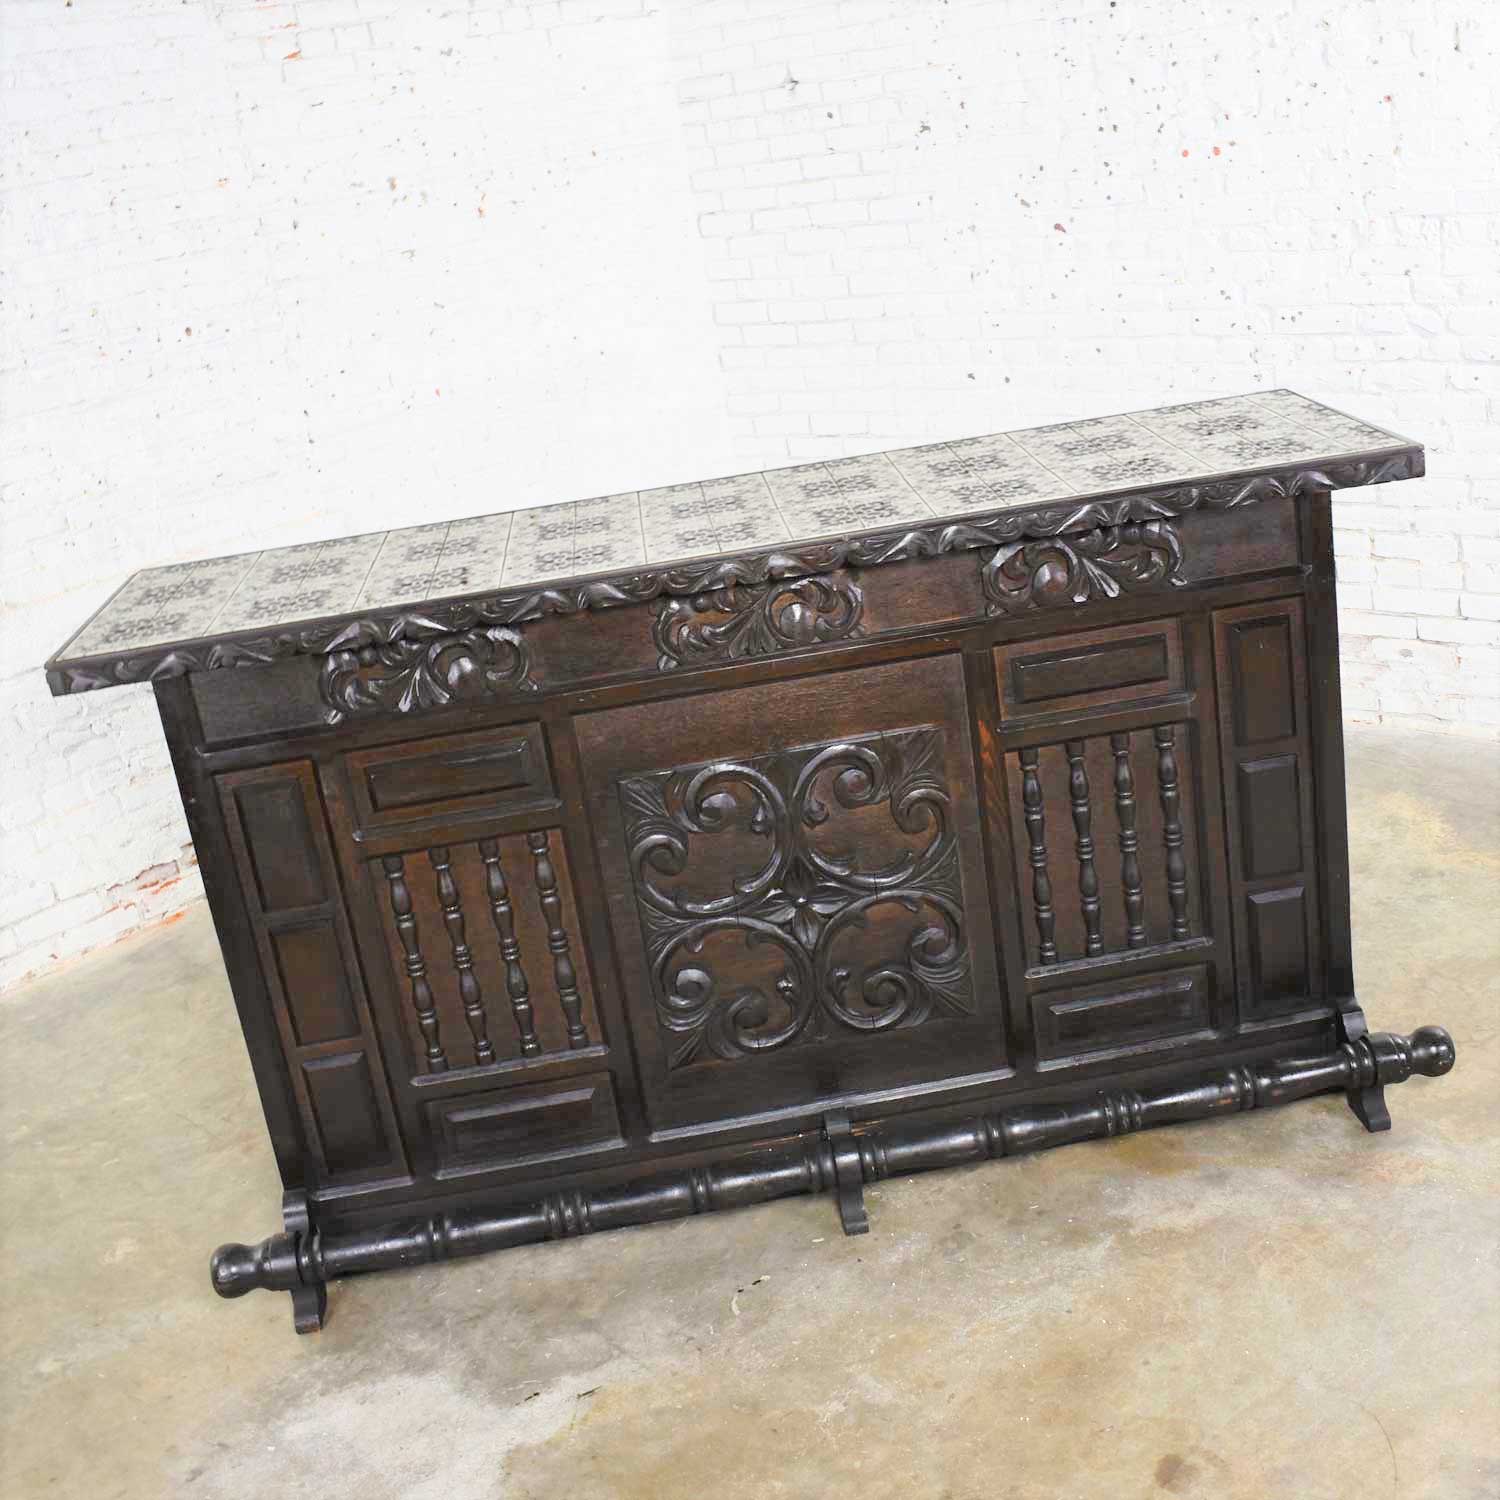 Vintage Spanish Revival Style Dry Bar with Inlaid Tile Top in Style of Artes de Mexico